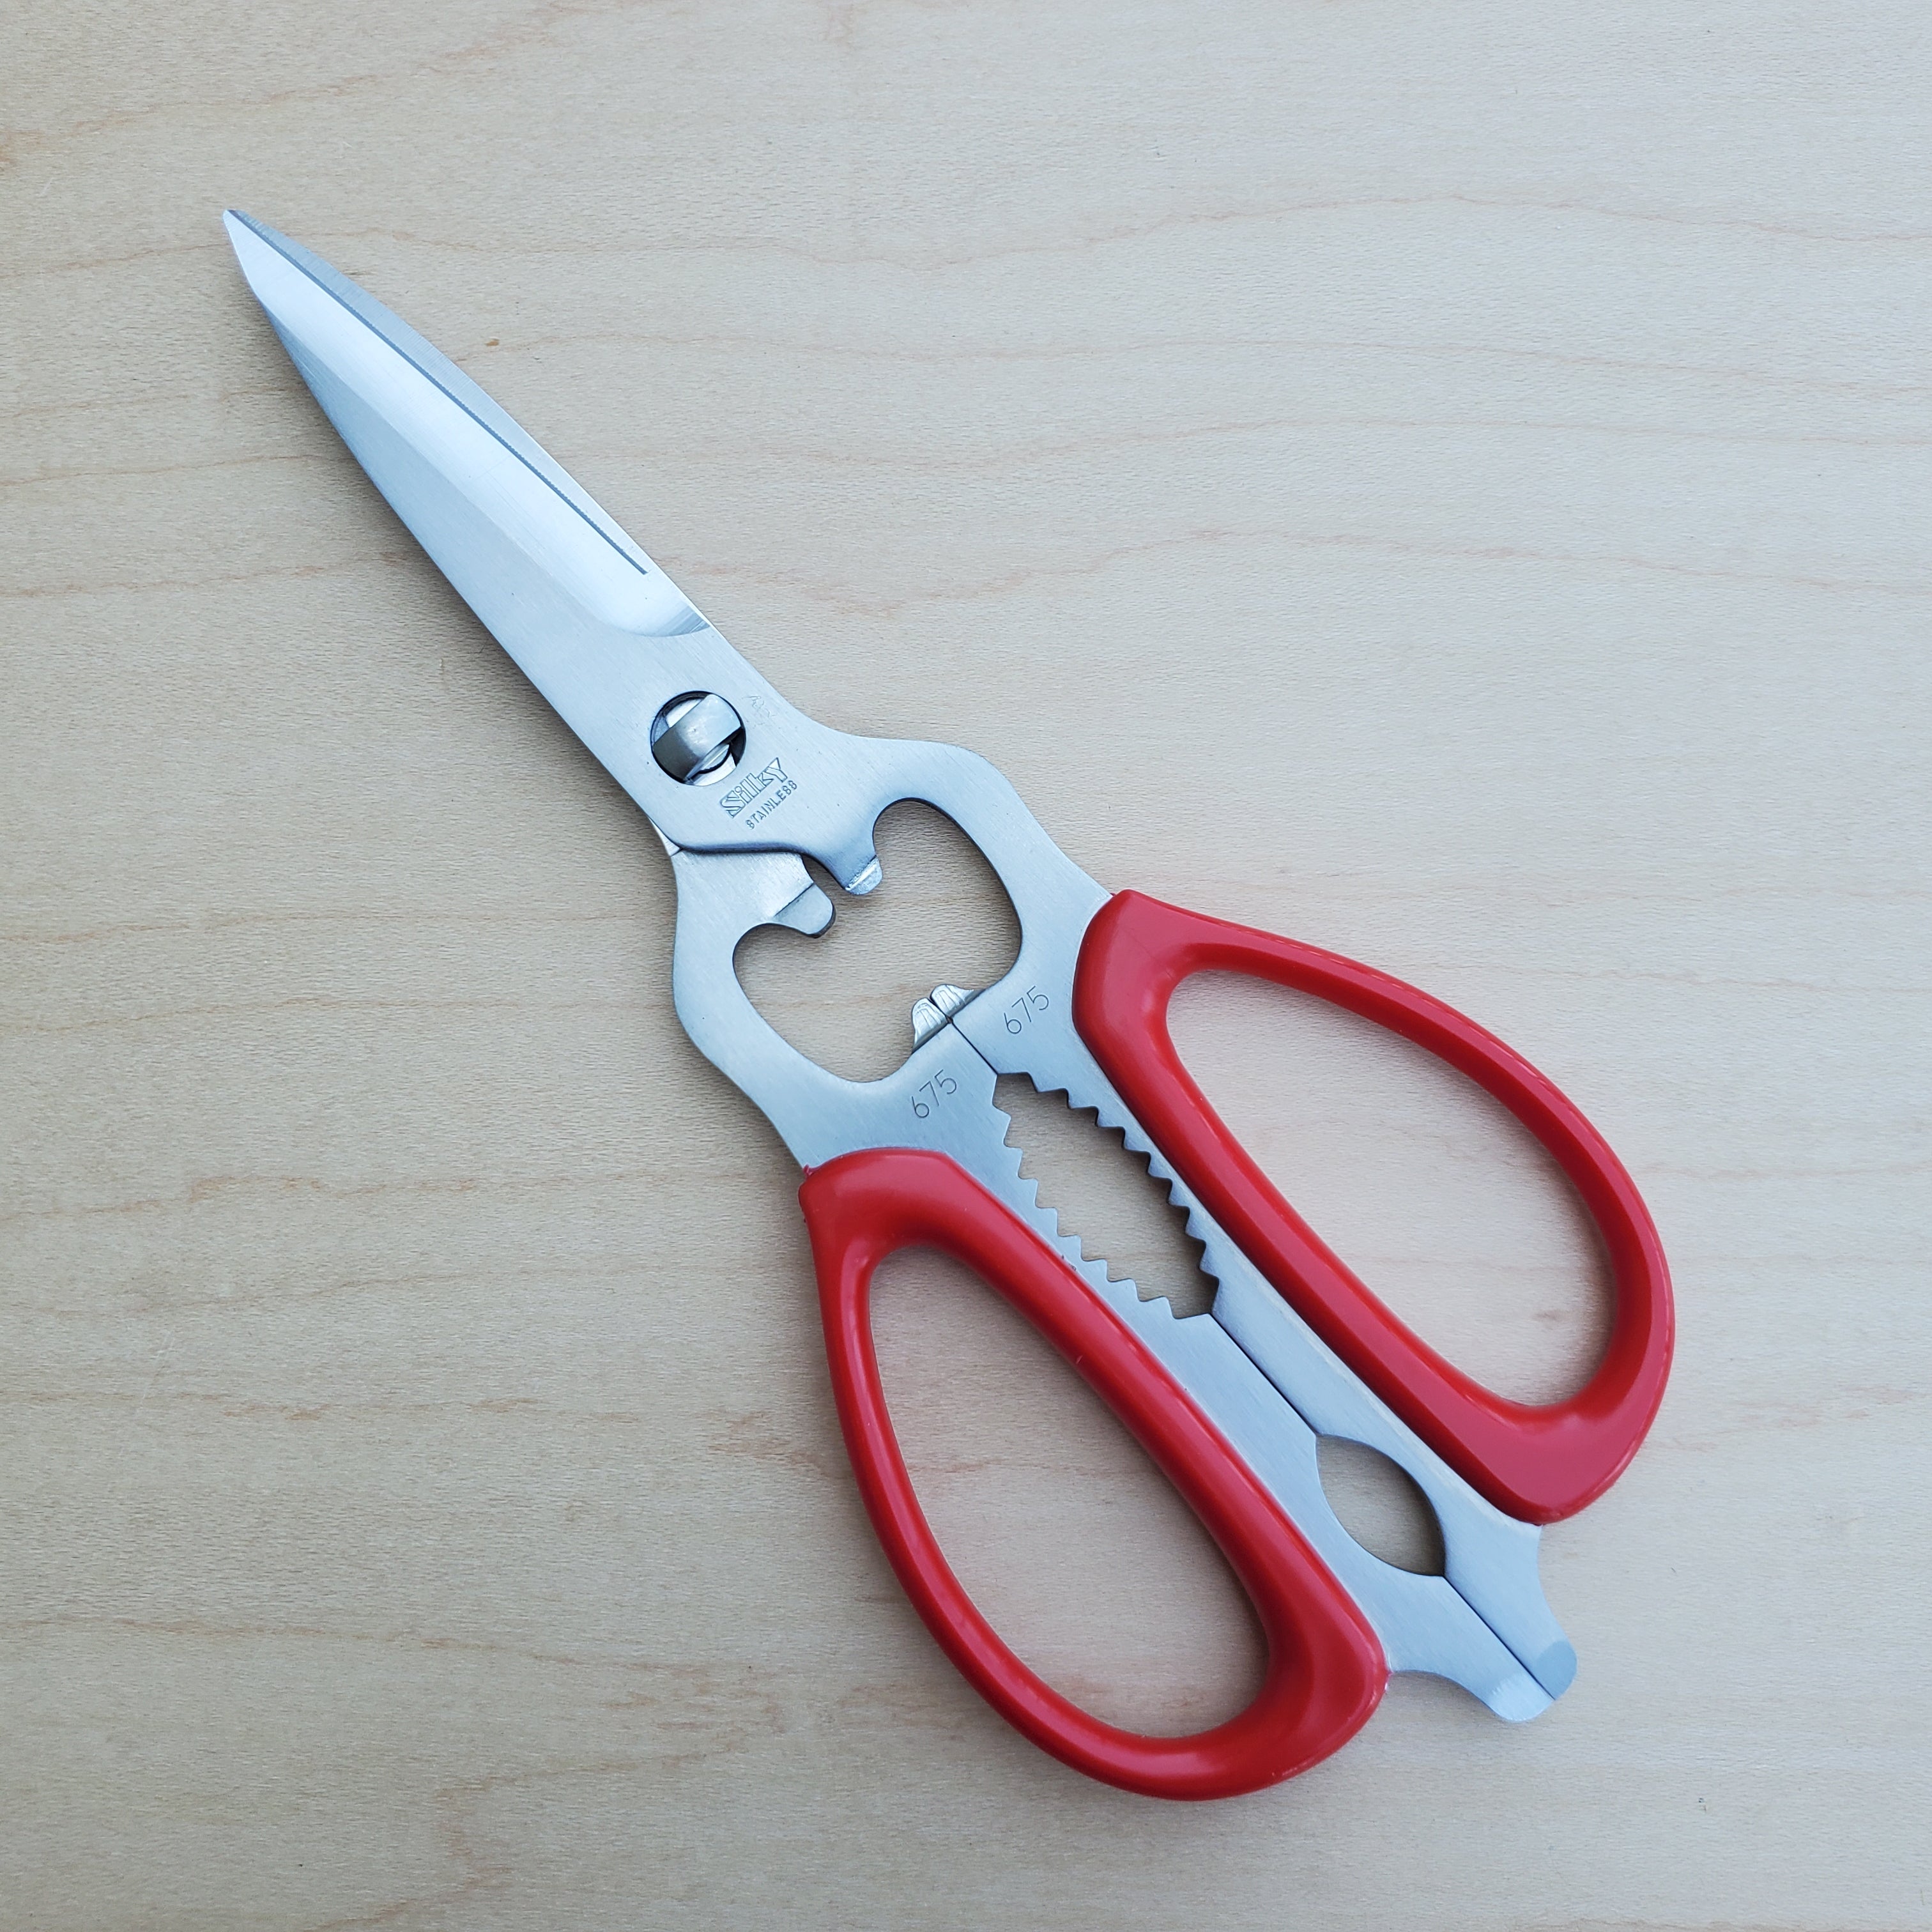 Professional Stainless Kitchen Shears